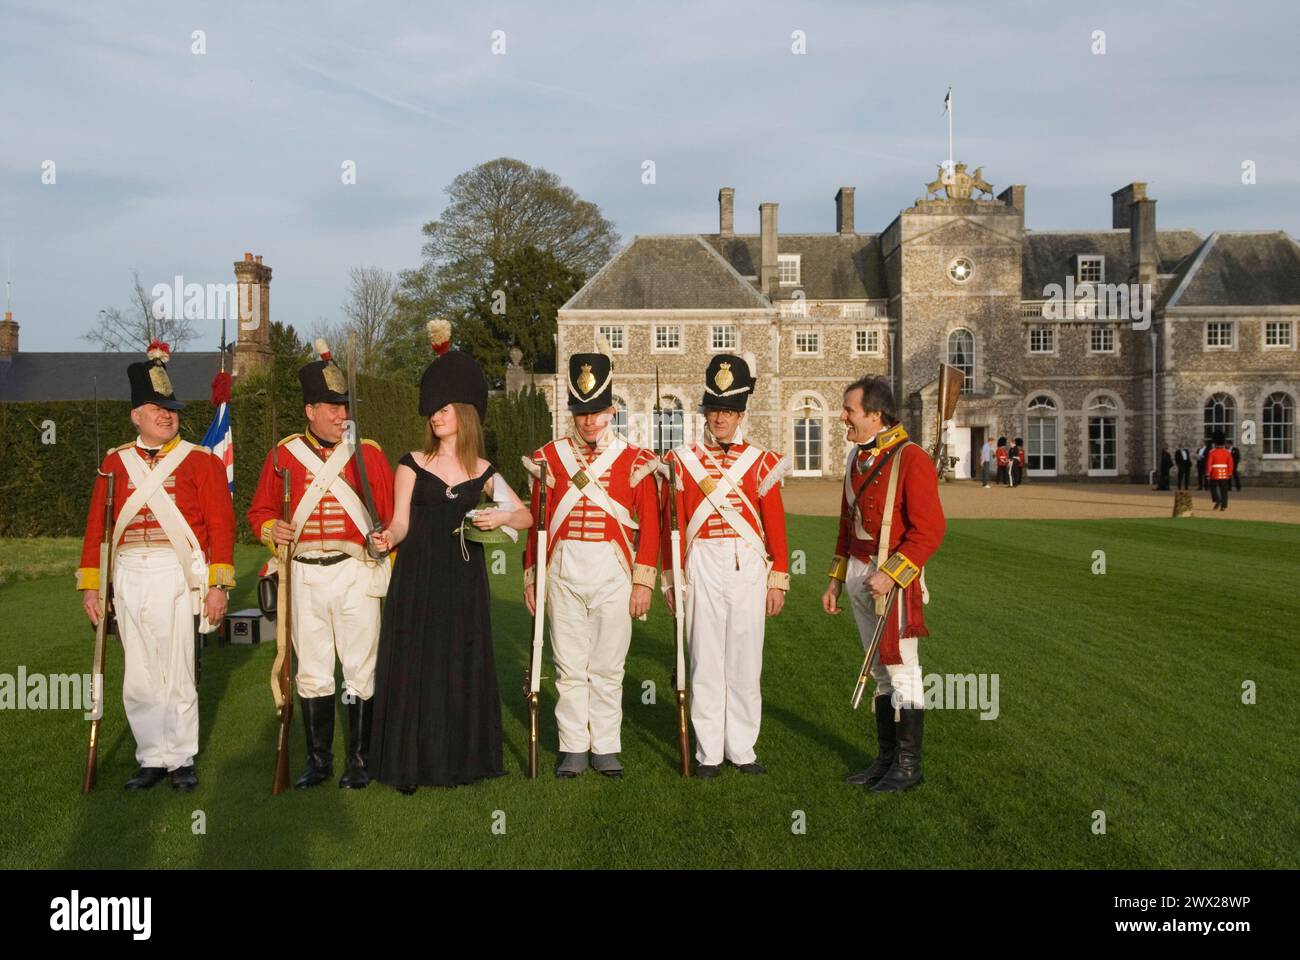 Country mansion British society wealth landed gentry private home Farleigh Wallop House, Farleigh Wallop, Hampshire. Lady Clementine Wallop with re-enactment group of weekend soldiers. UK 2008, 2000s HOMER SYKES Stock Photo